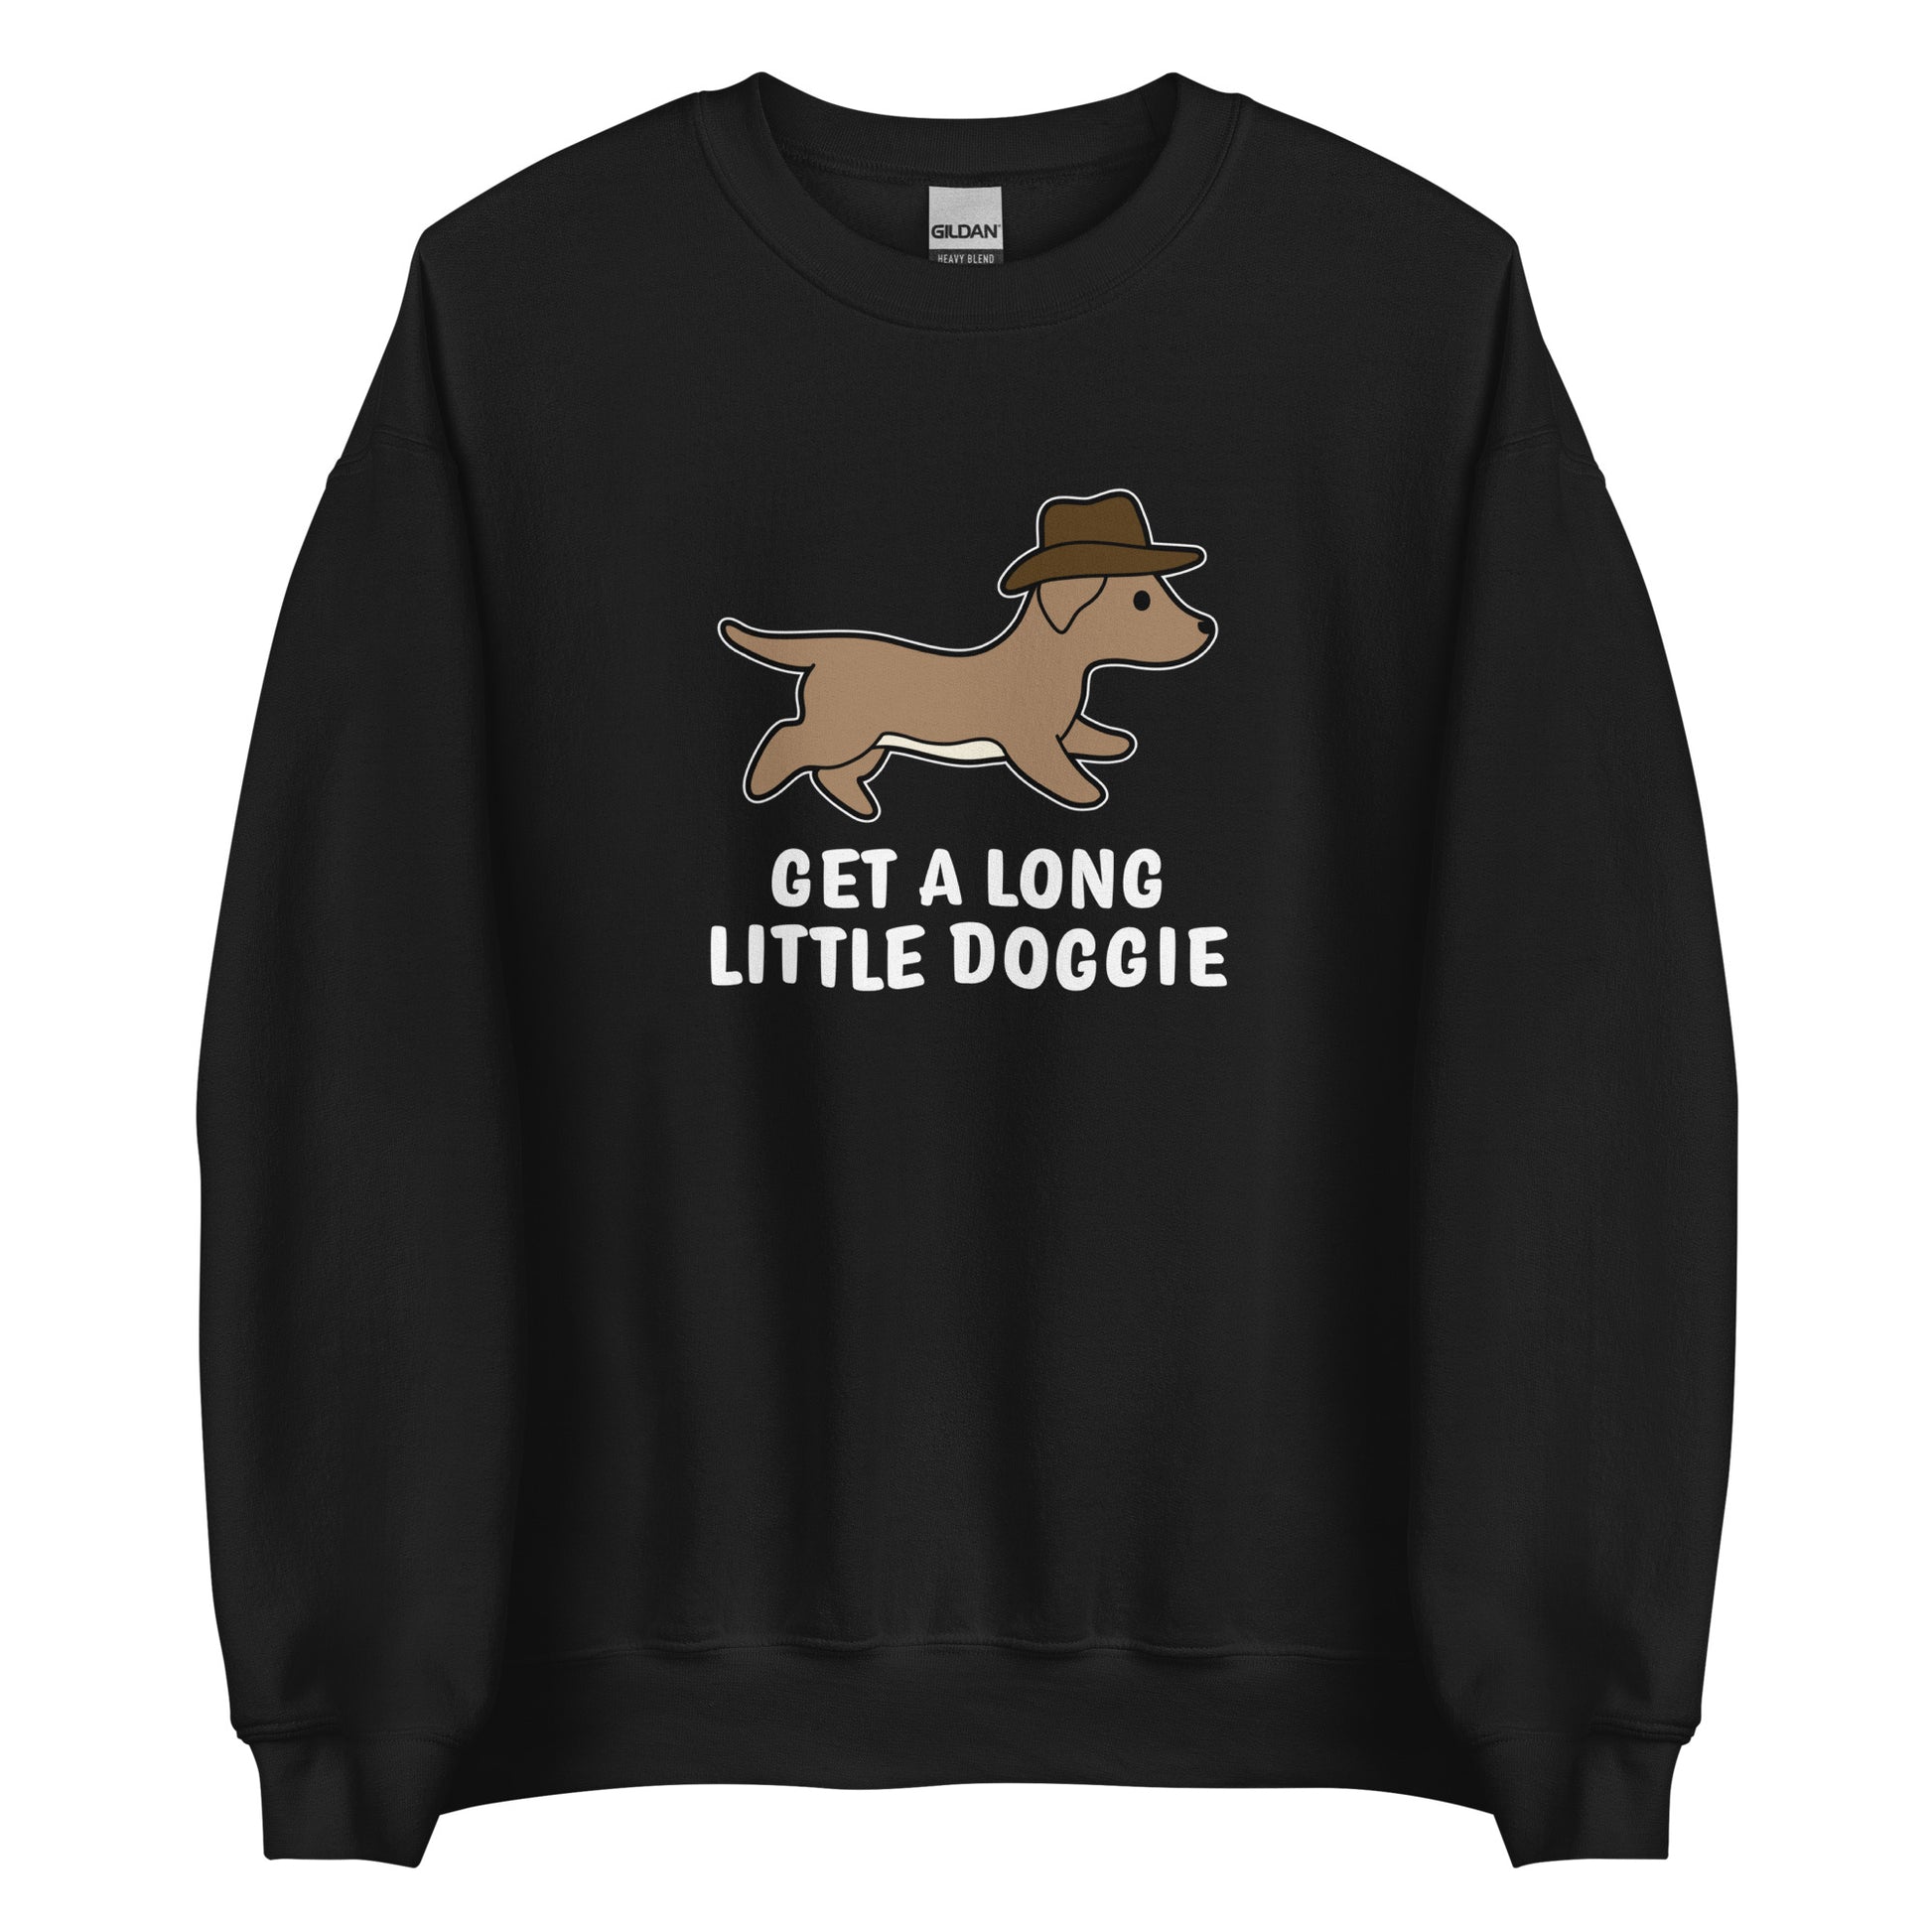 A black crewneck sweatshirt featuring an image of a dachshund wearing a cowboy hat. Text below the dog reads "Get a long little doggie"